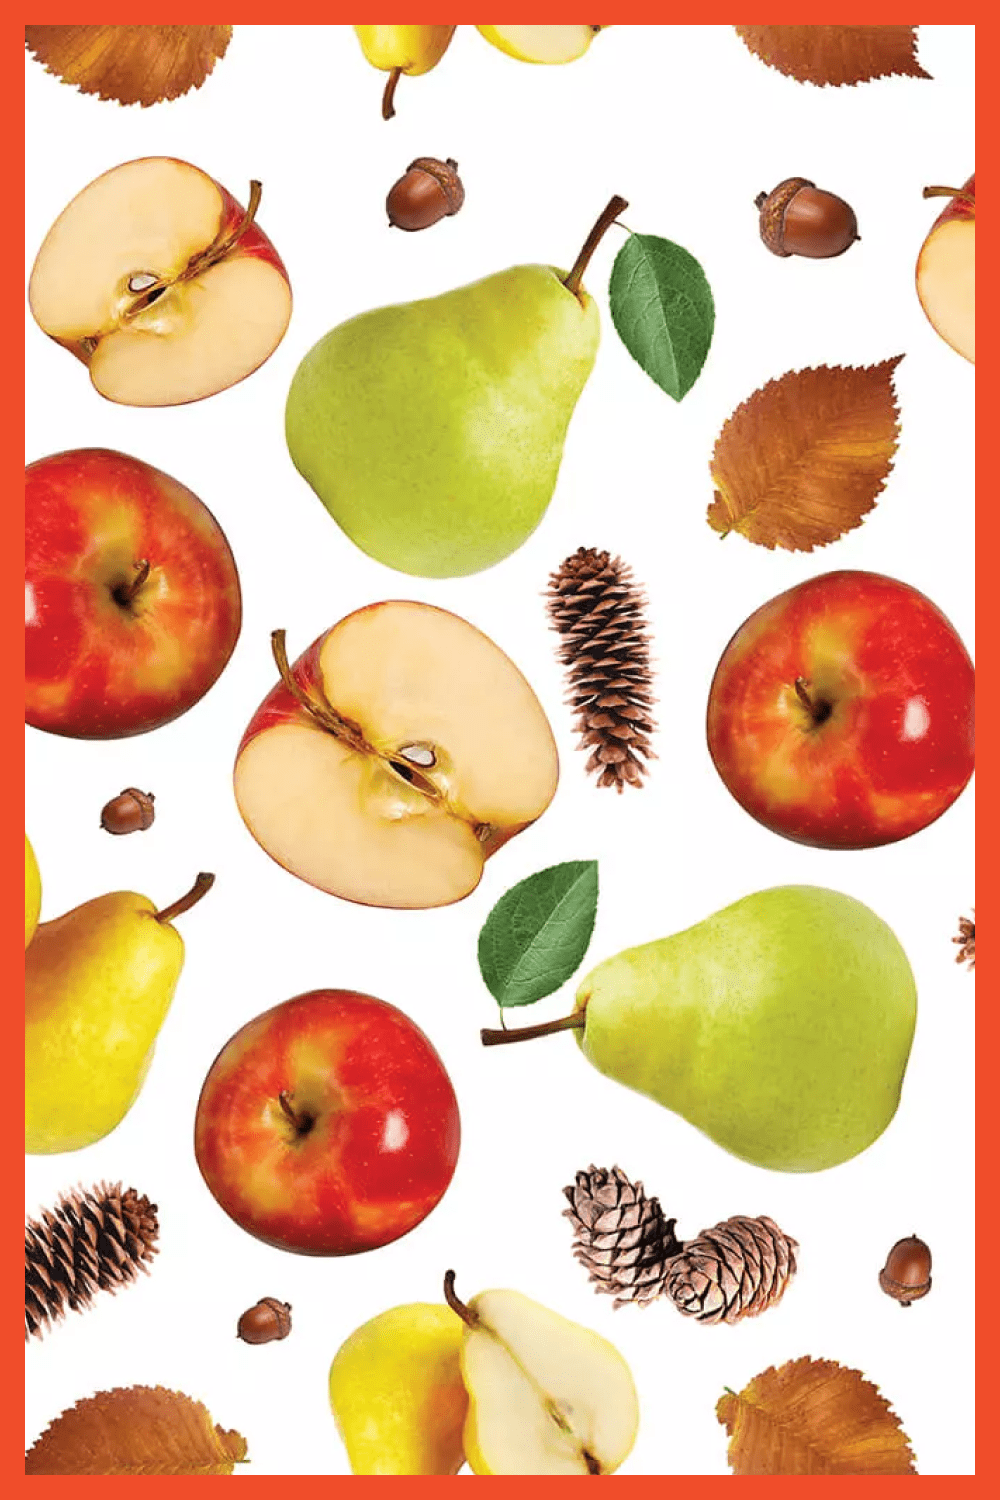 Fir cones, apples and pears on a white background.